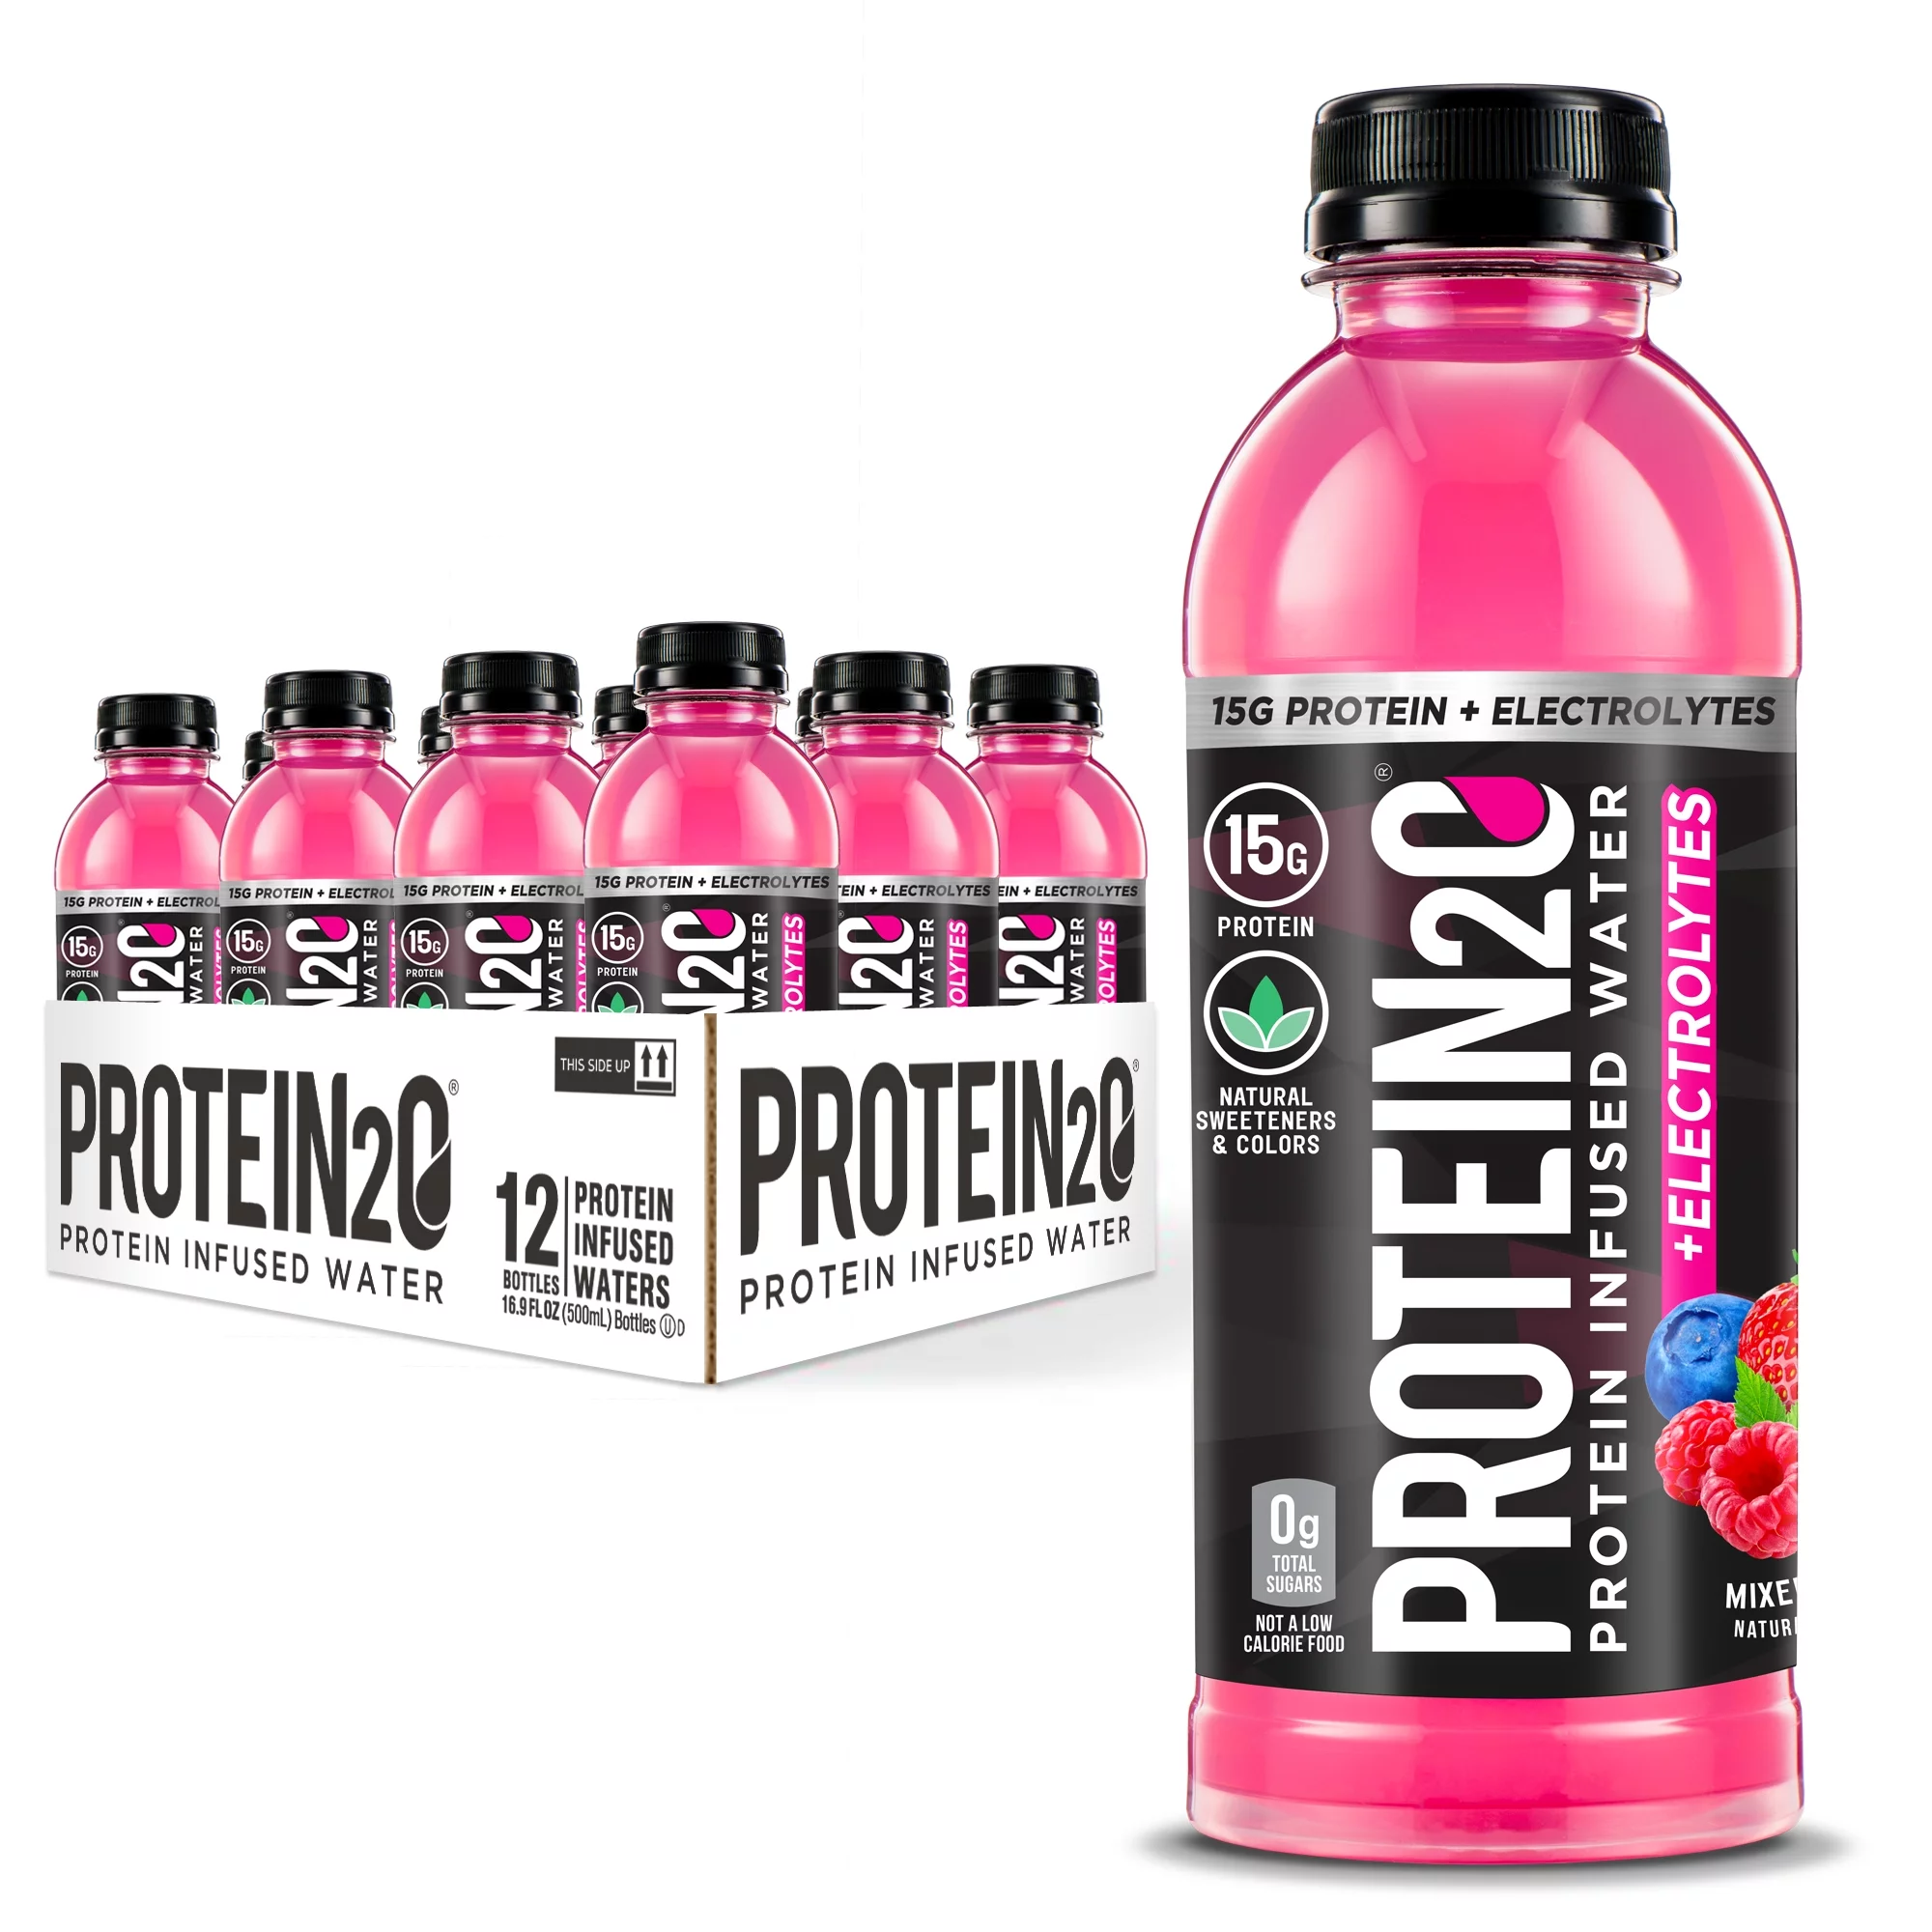 Protein2o +Electrolytes, 15g Whey Protein Infused Water, Mixed Berry, 16.9 fl oz Bottle (Pack of 12)